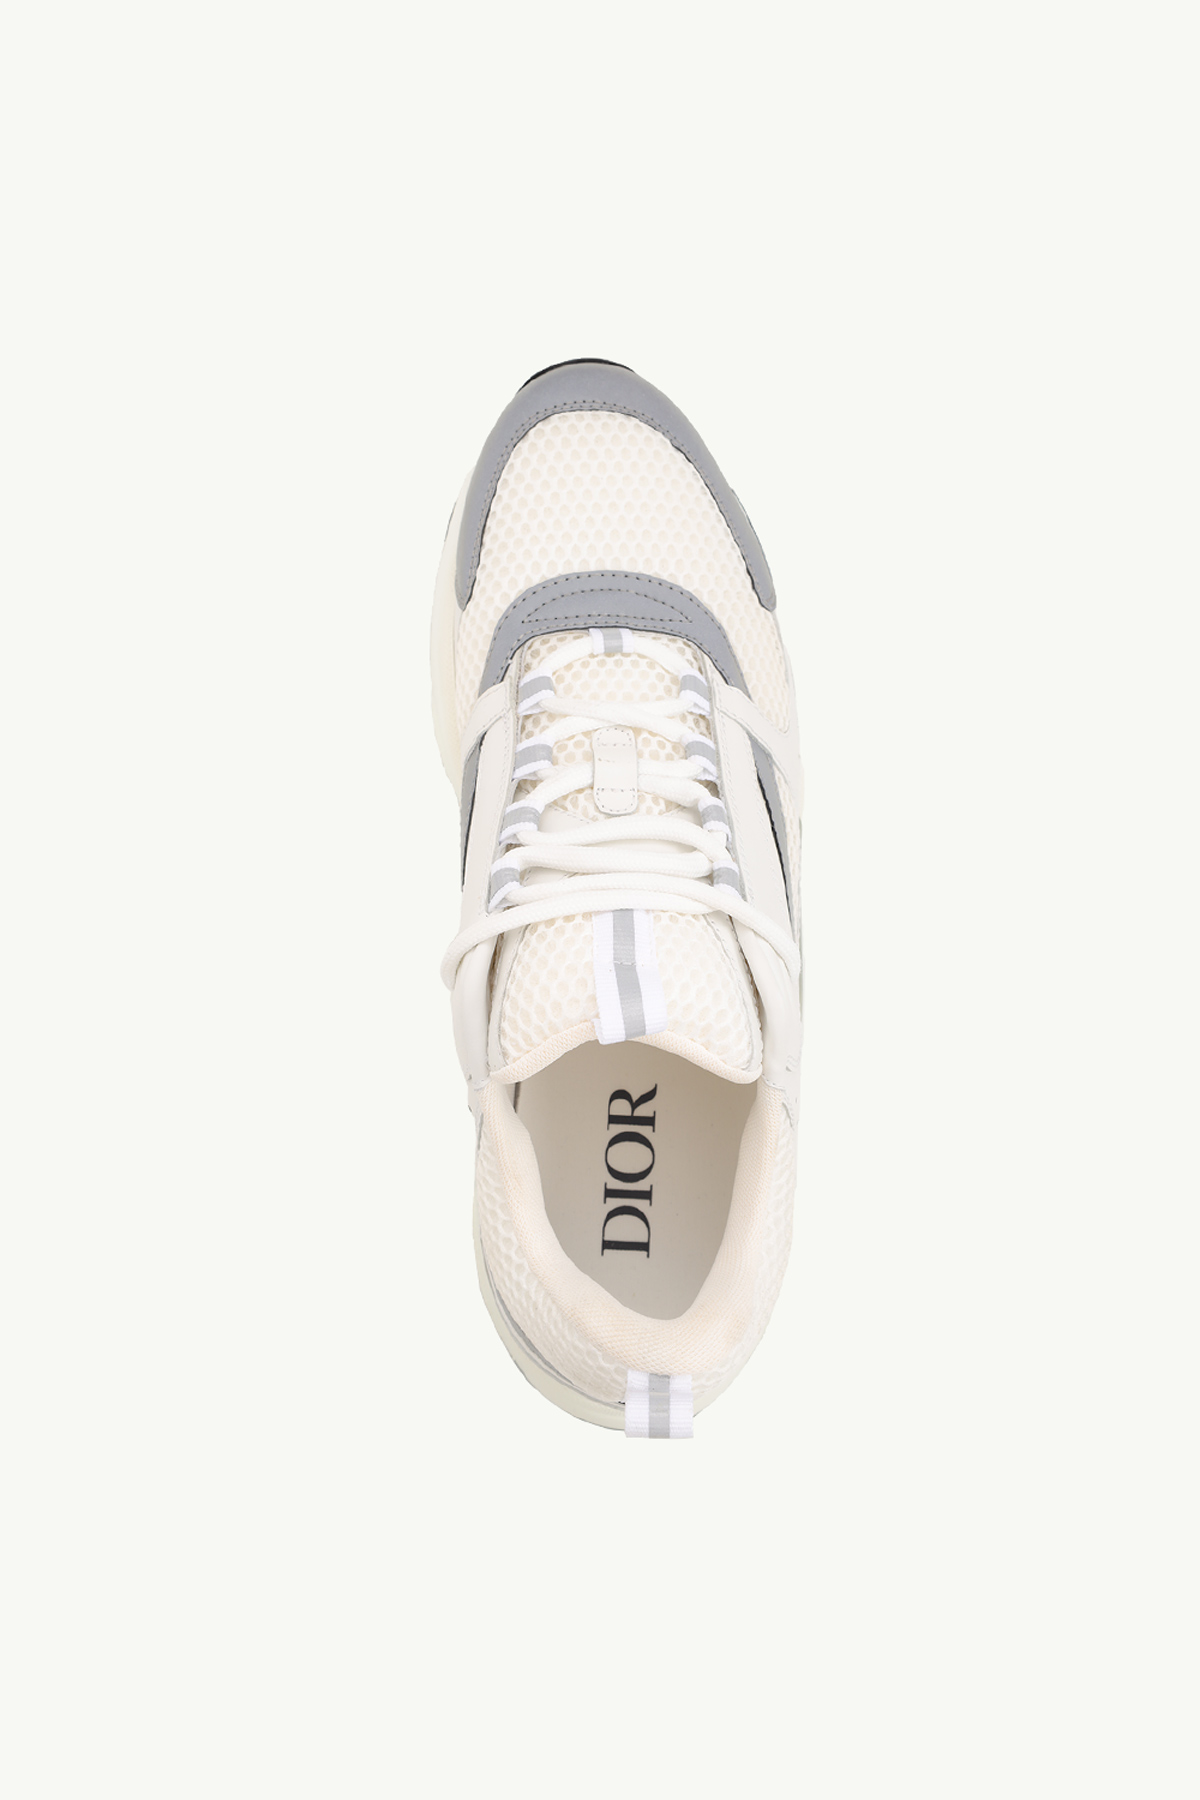 CHRISTIAN DIOR B22 Sneakers in White Technical Mesh 3